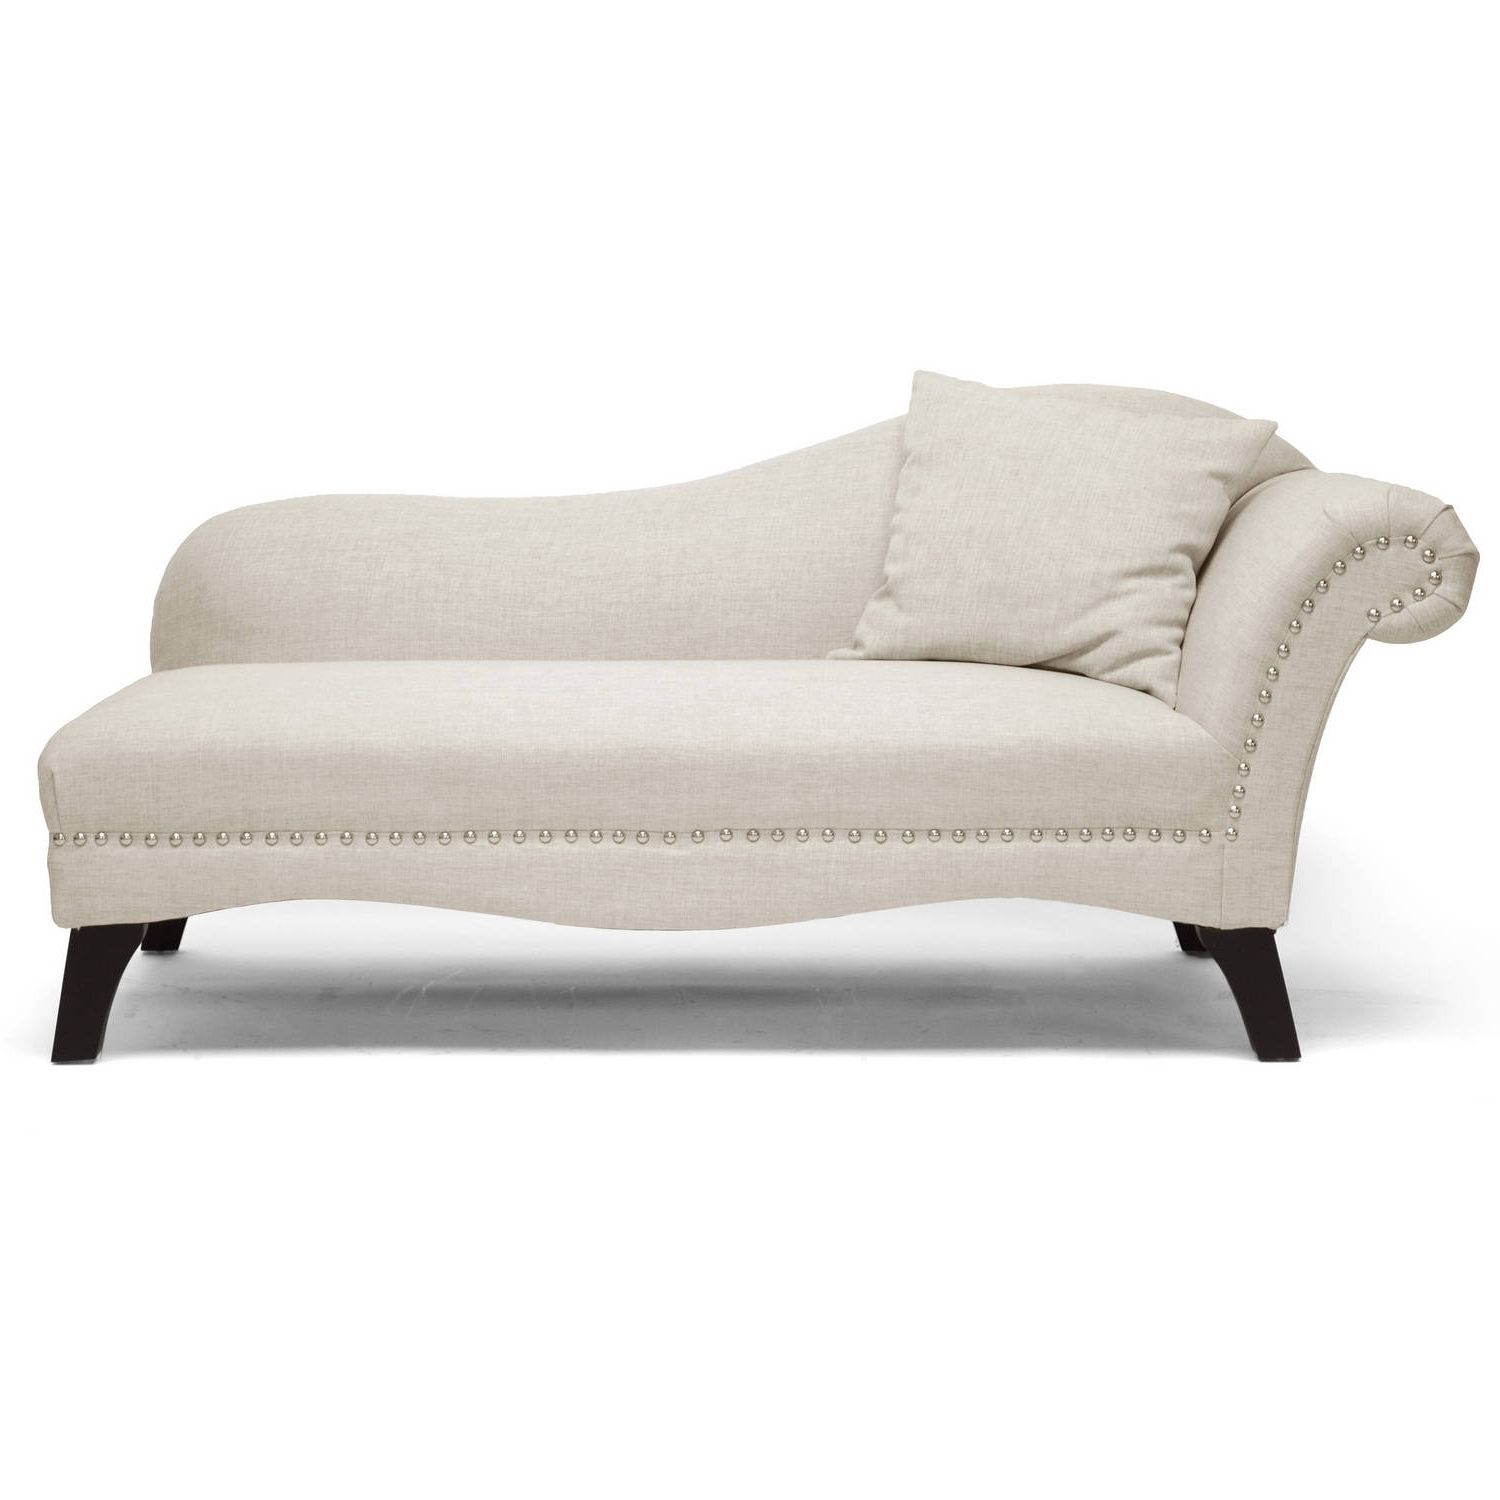 Chaise Lounges – Walmart With Regard To Most Up To Date Couch Chaise Lounges (View 2 of 15)